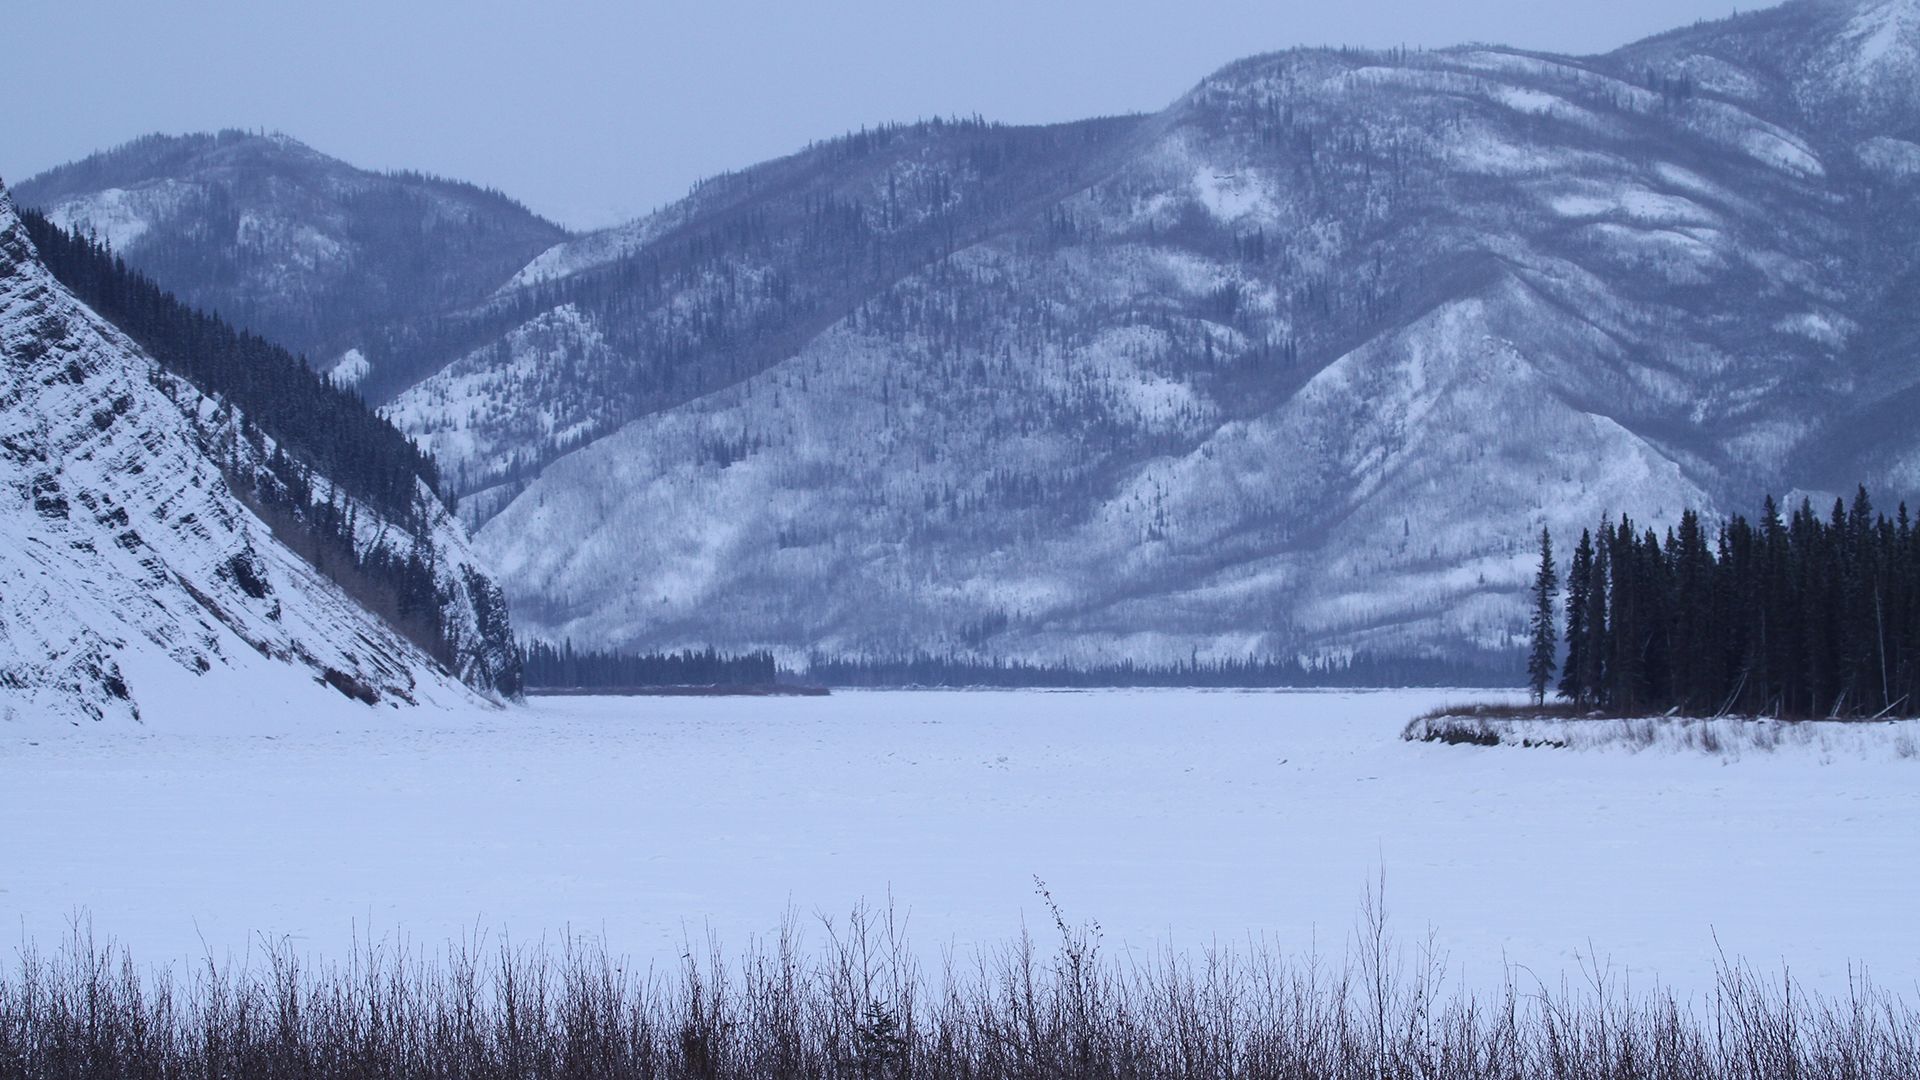 Eagle, AK: The rough and beautiful landscape of Eagle, AK. This is from Life below zero. [Photo of the day - December 2021]